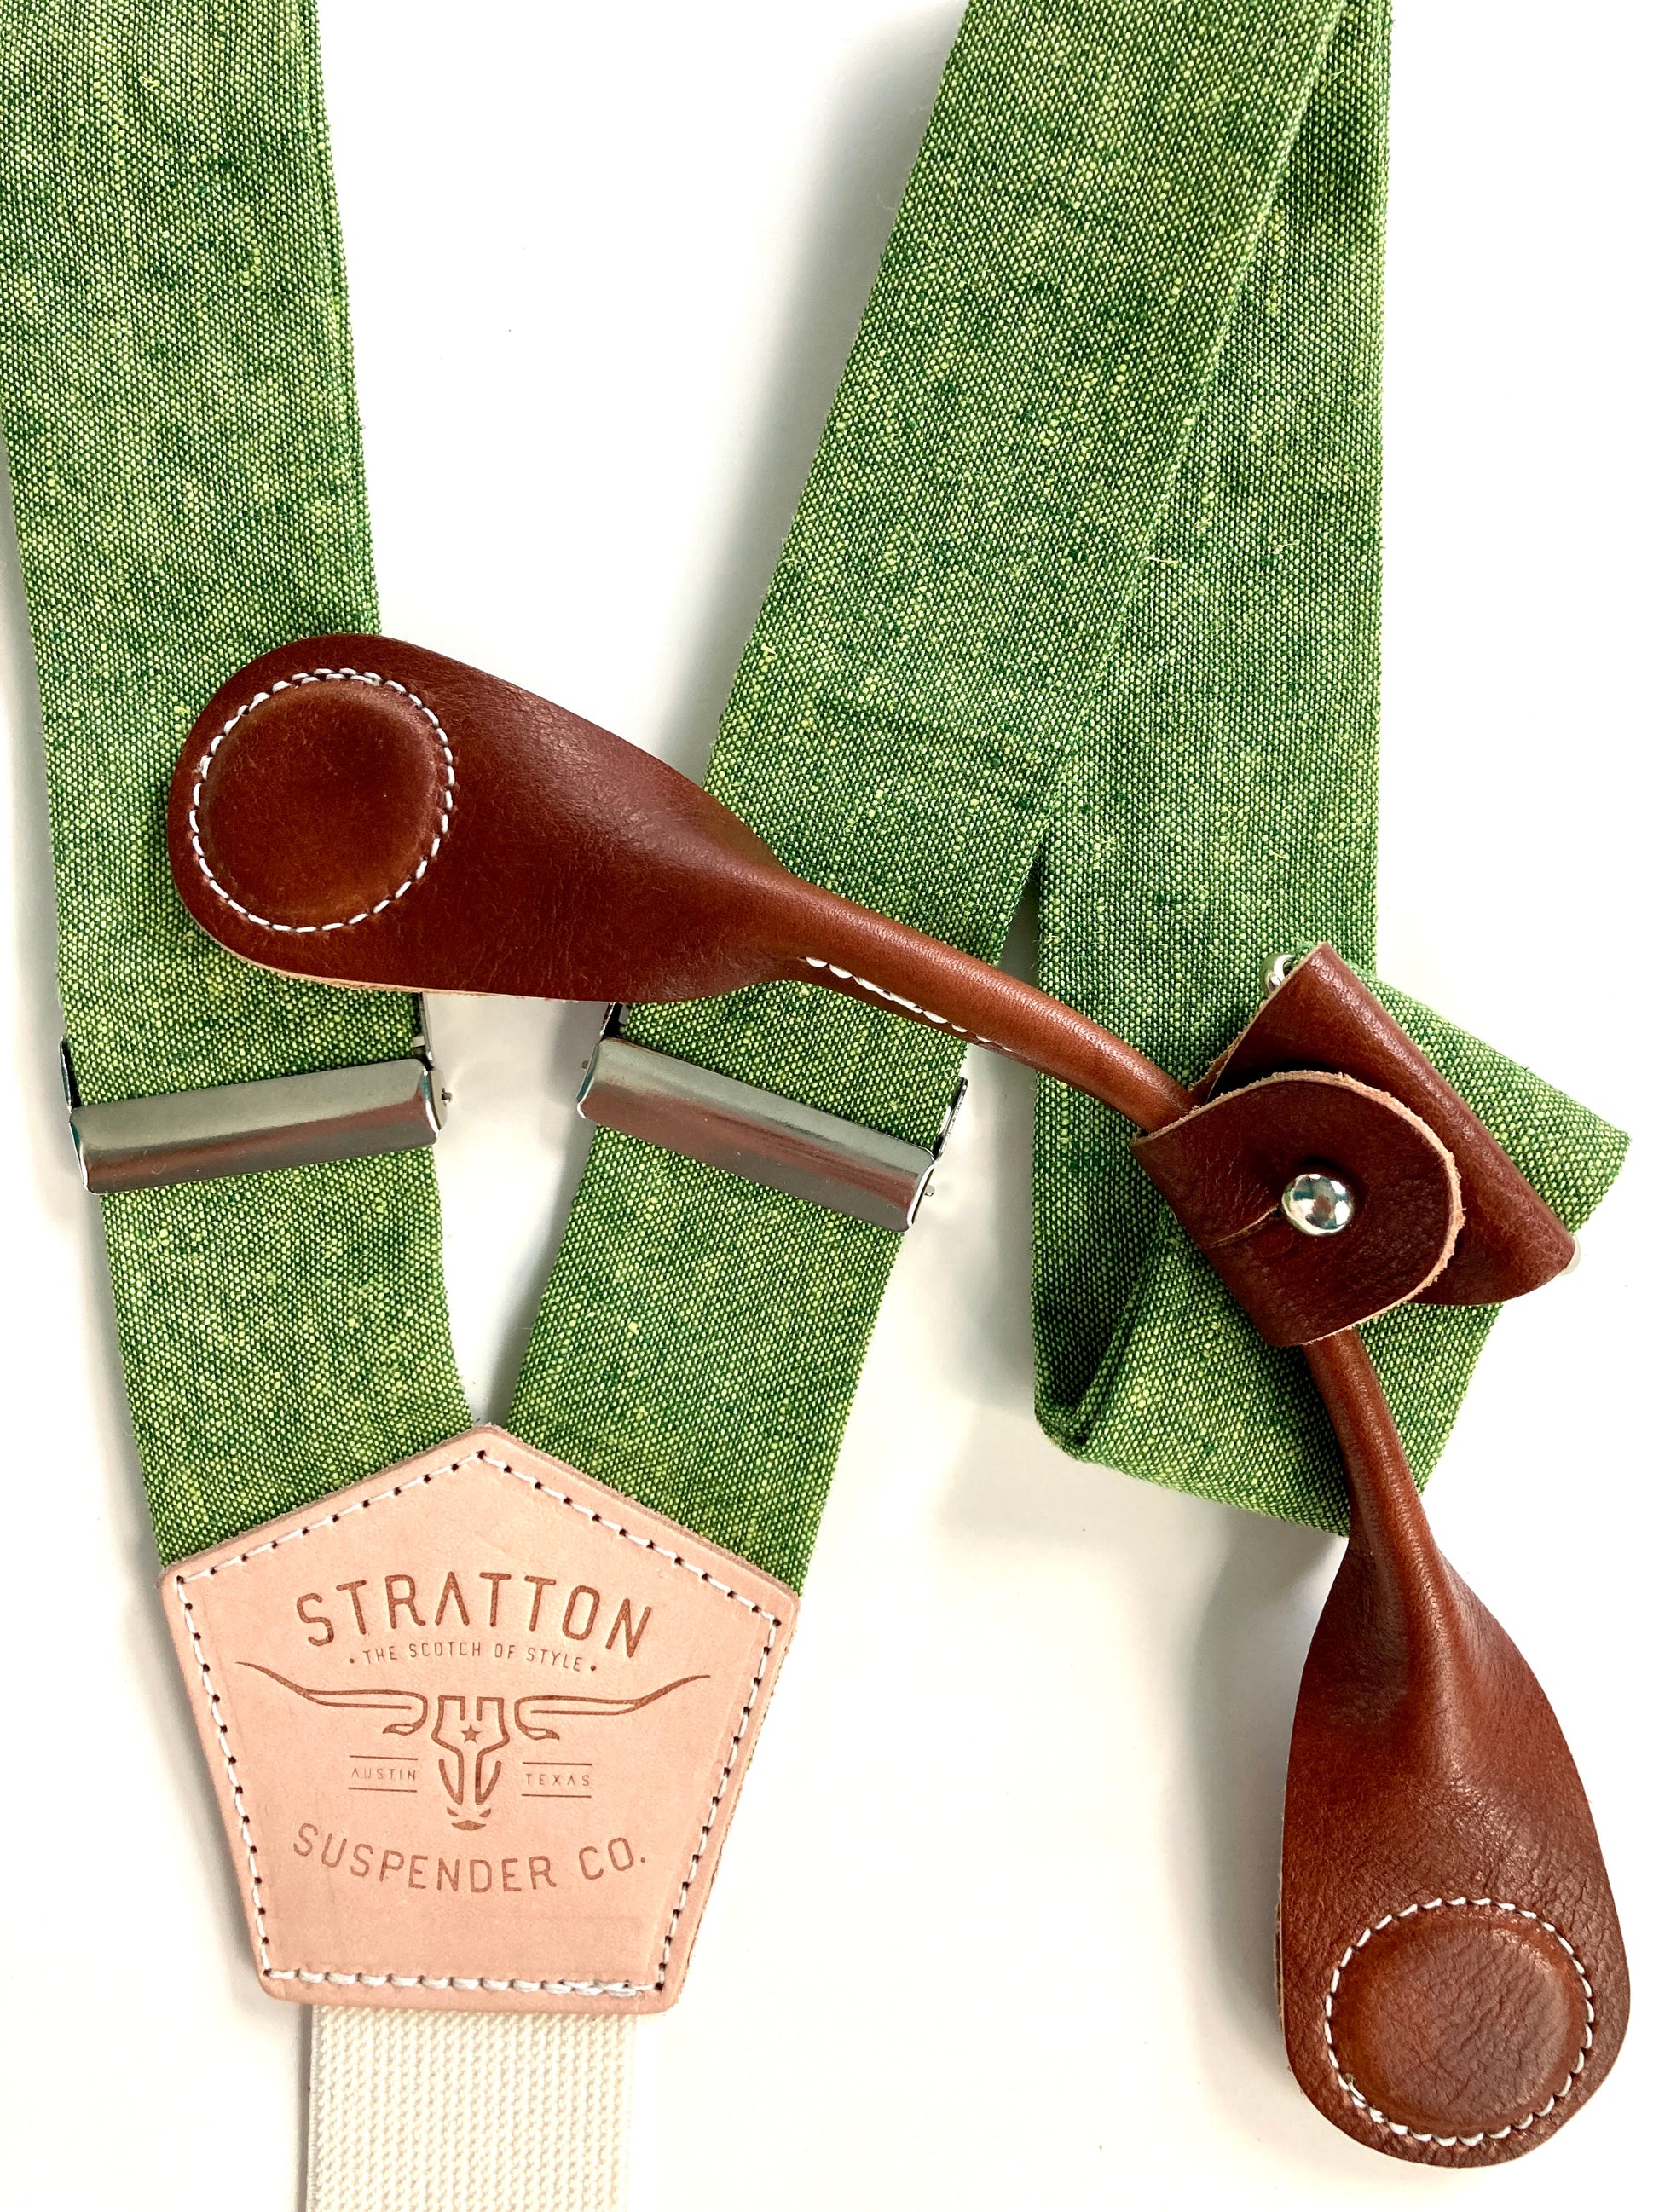 Stratton Suspender Co. features our Spruce (bright green) linen suspenders on veg tan shoulder leather with cream colored elastic back strap for the Fall 2022 suspenders collection Magnetic Stratton Suspender clasps in Cognac Pontedero Italian leather hand-picked by Stratton Suspender Co.